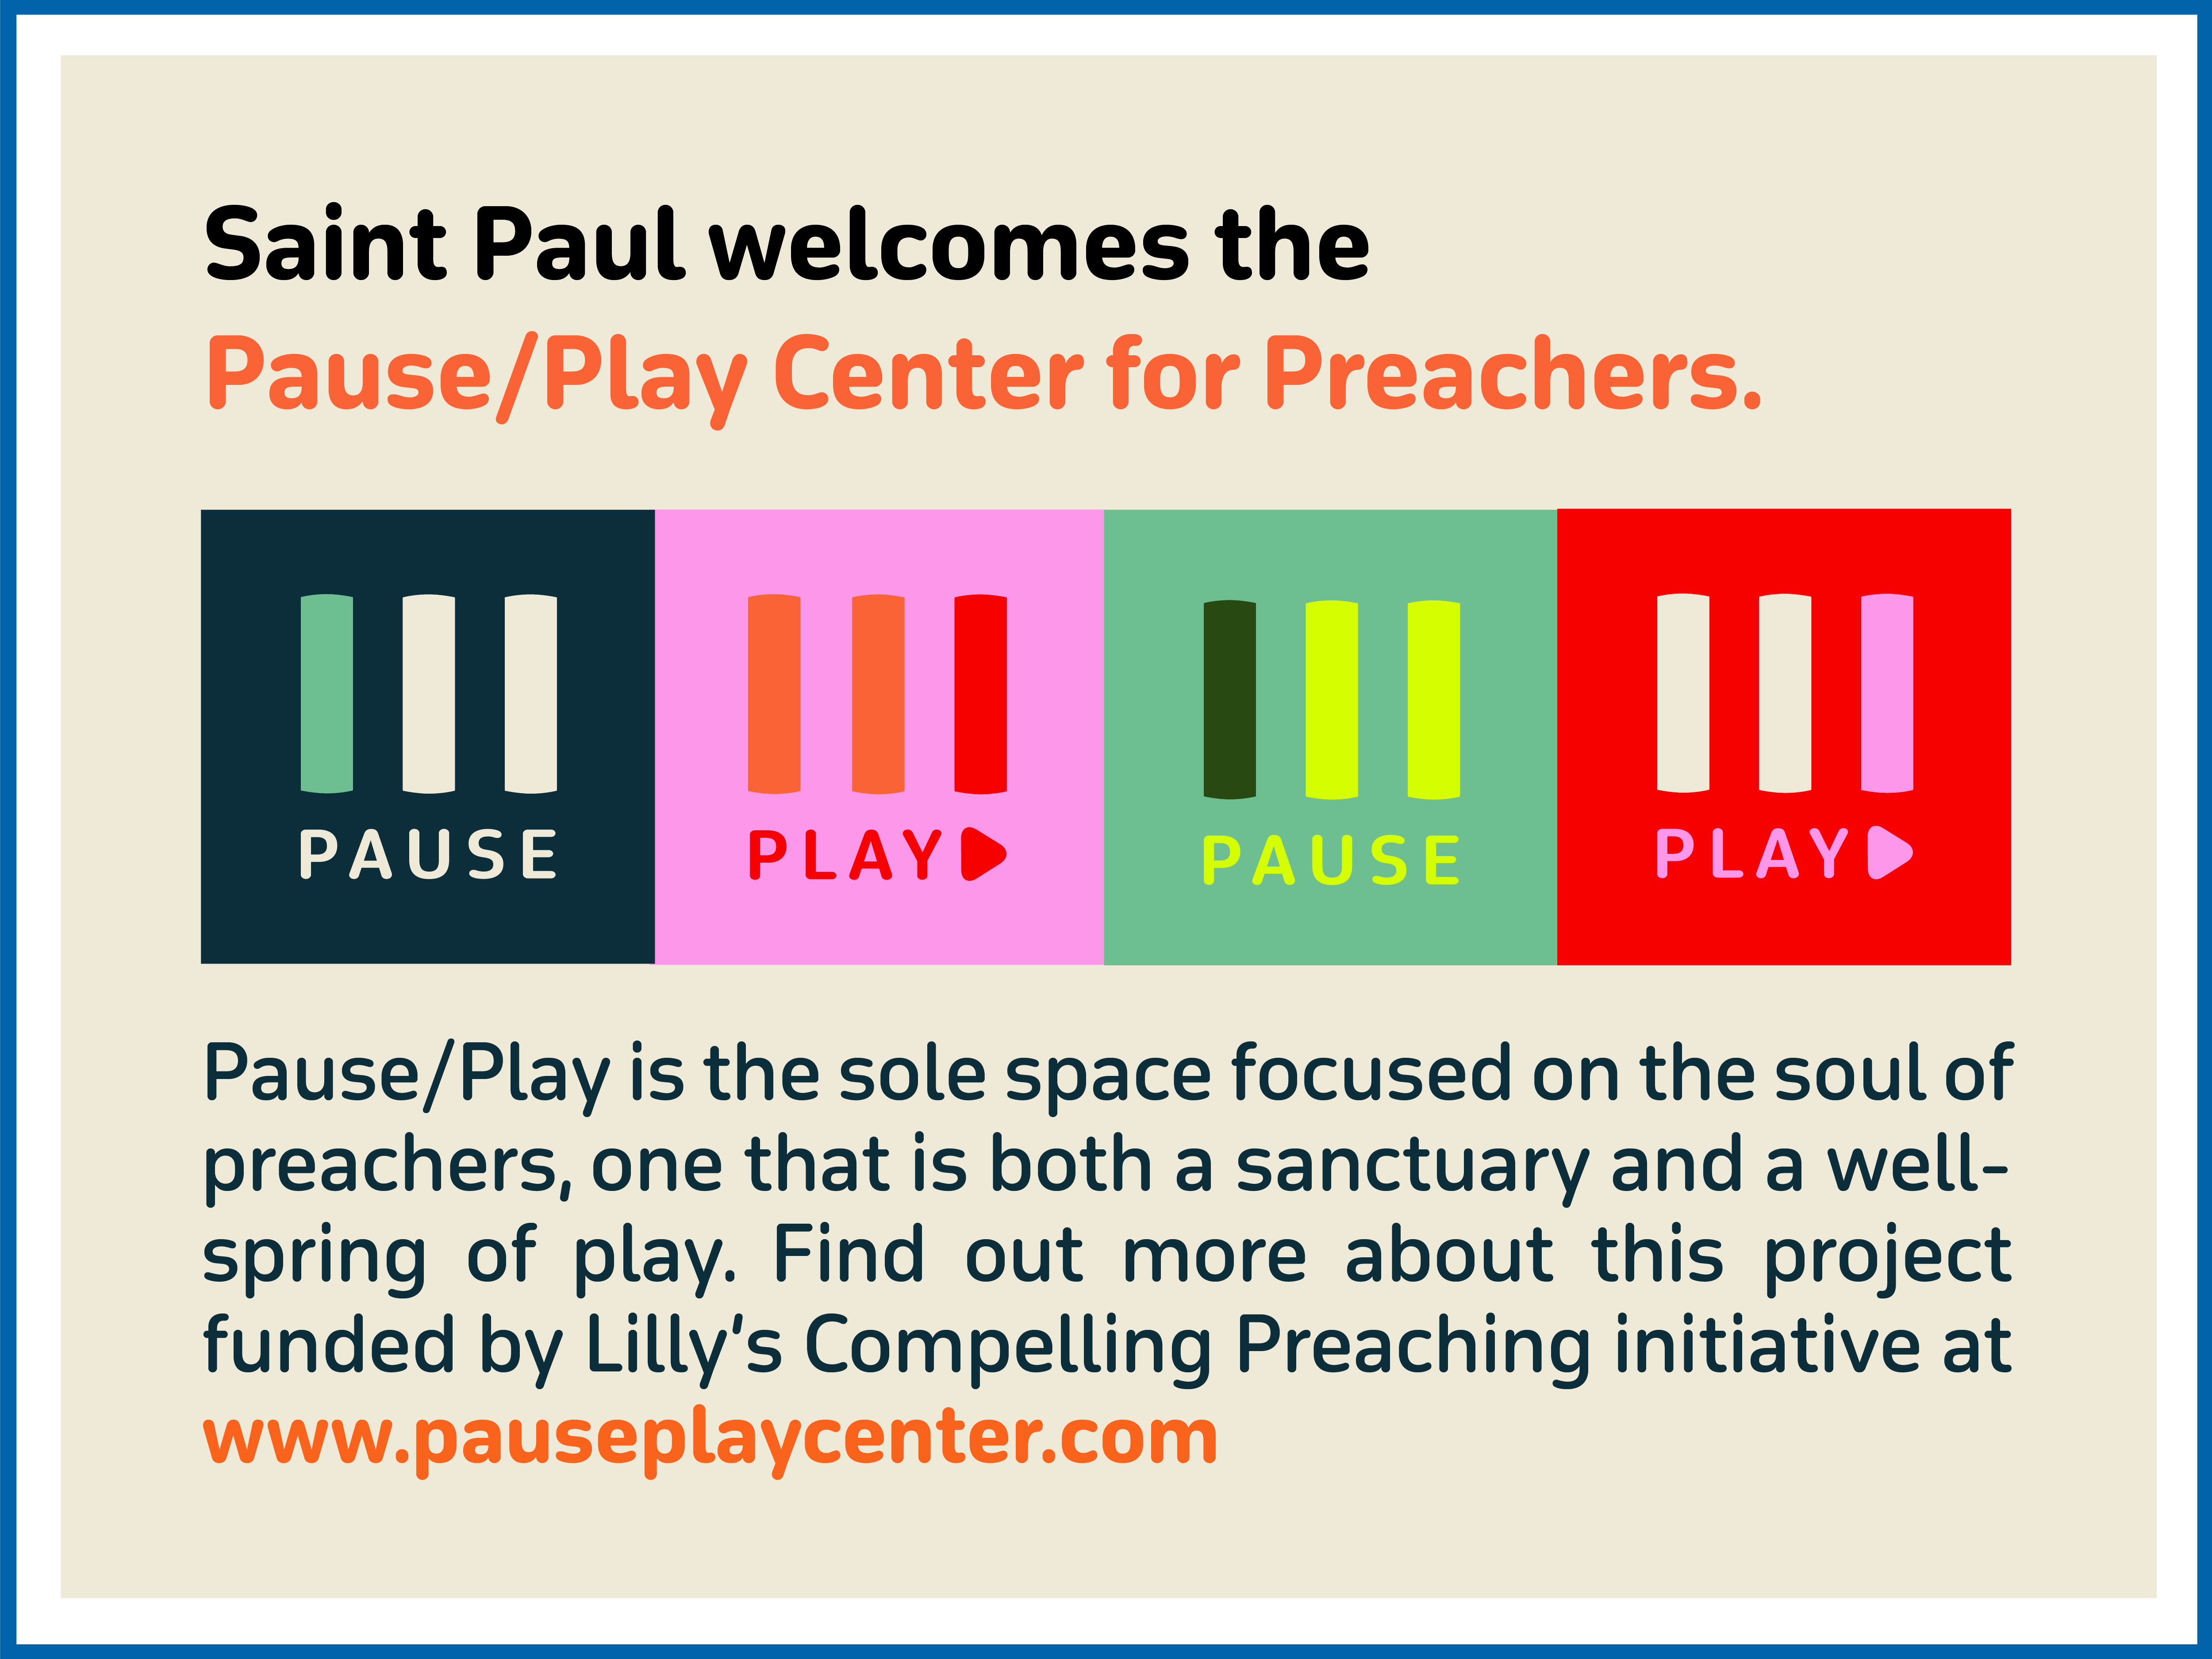 Pause/Play Center for Preachers